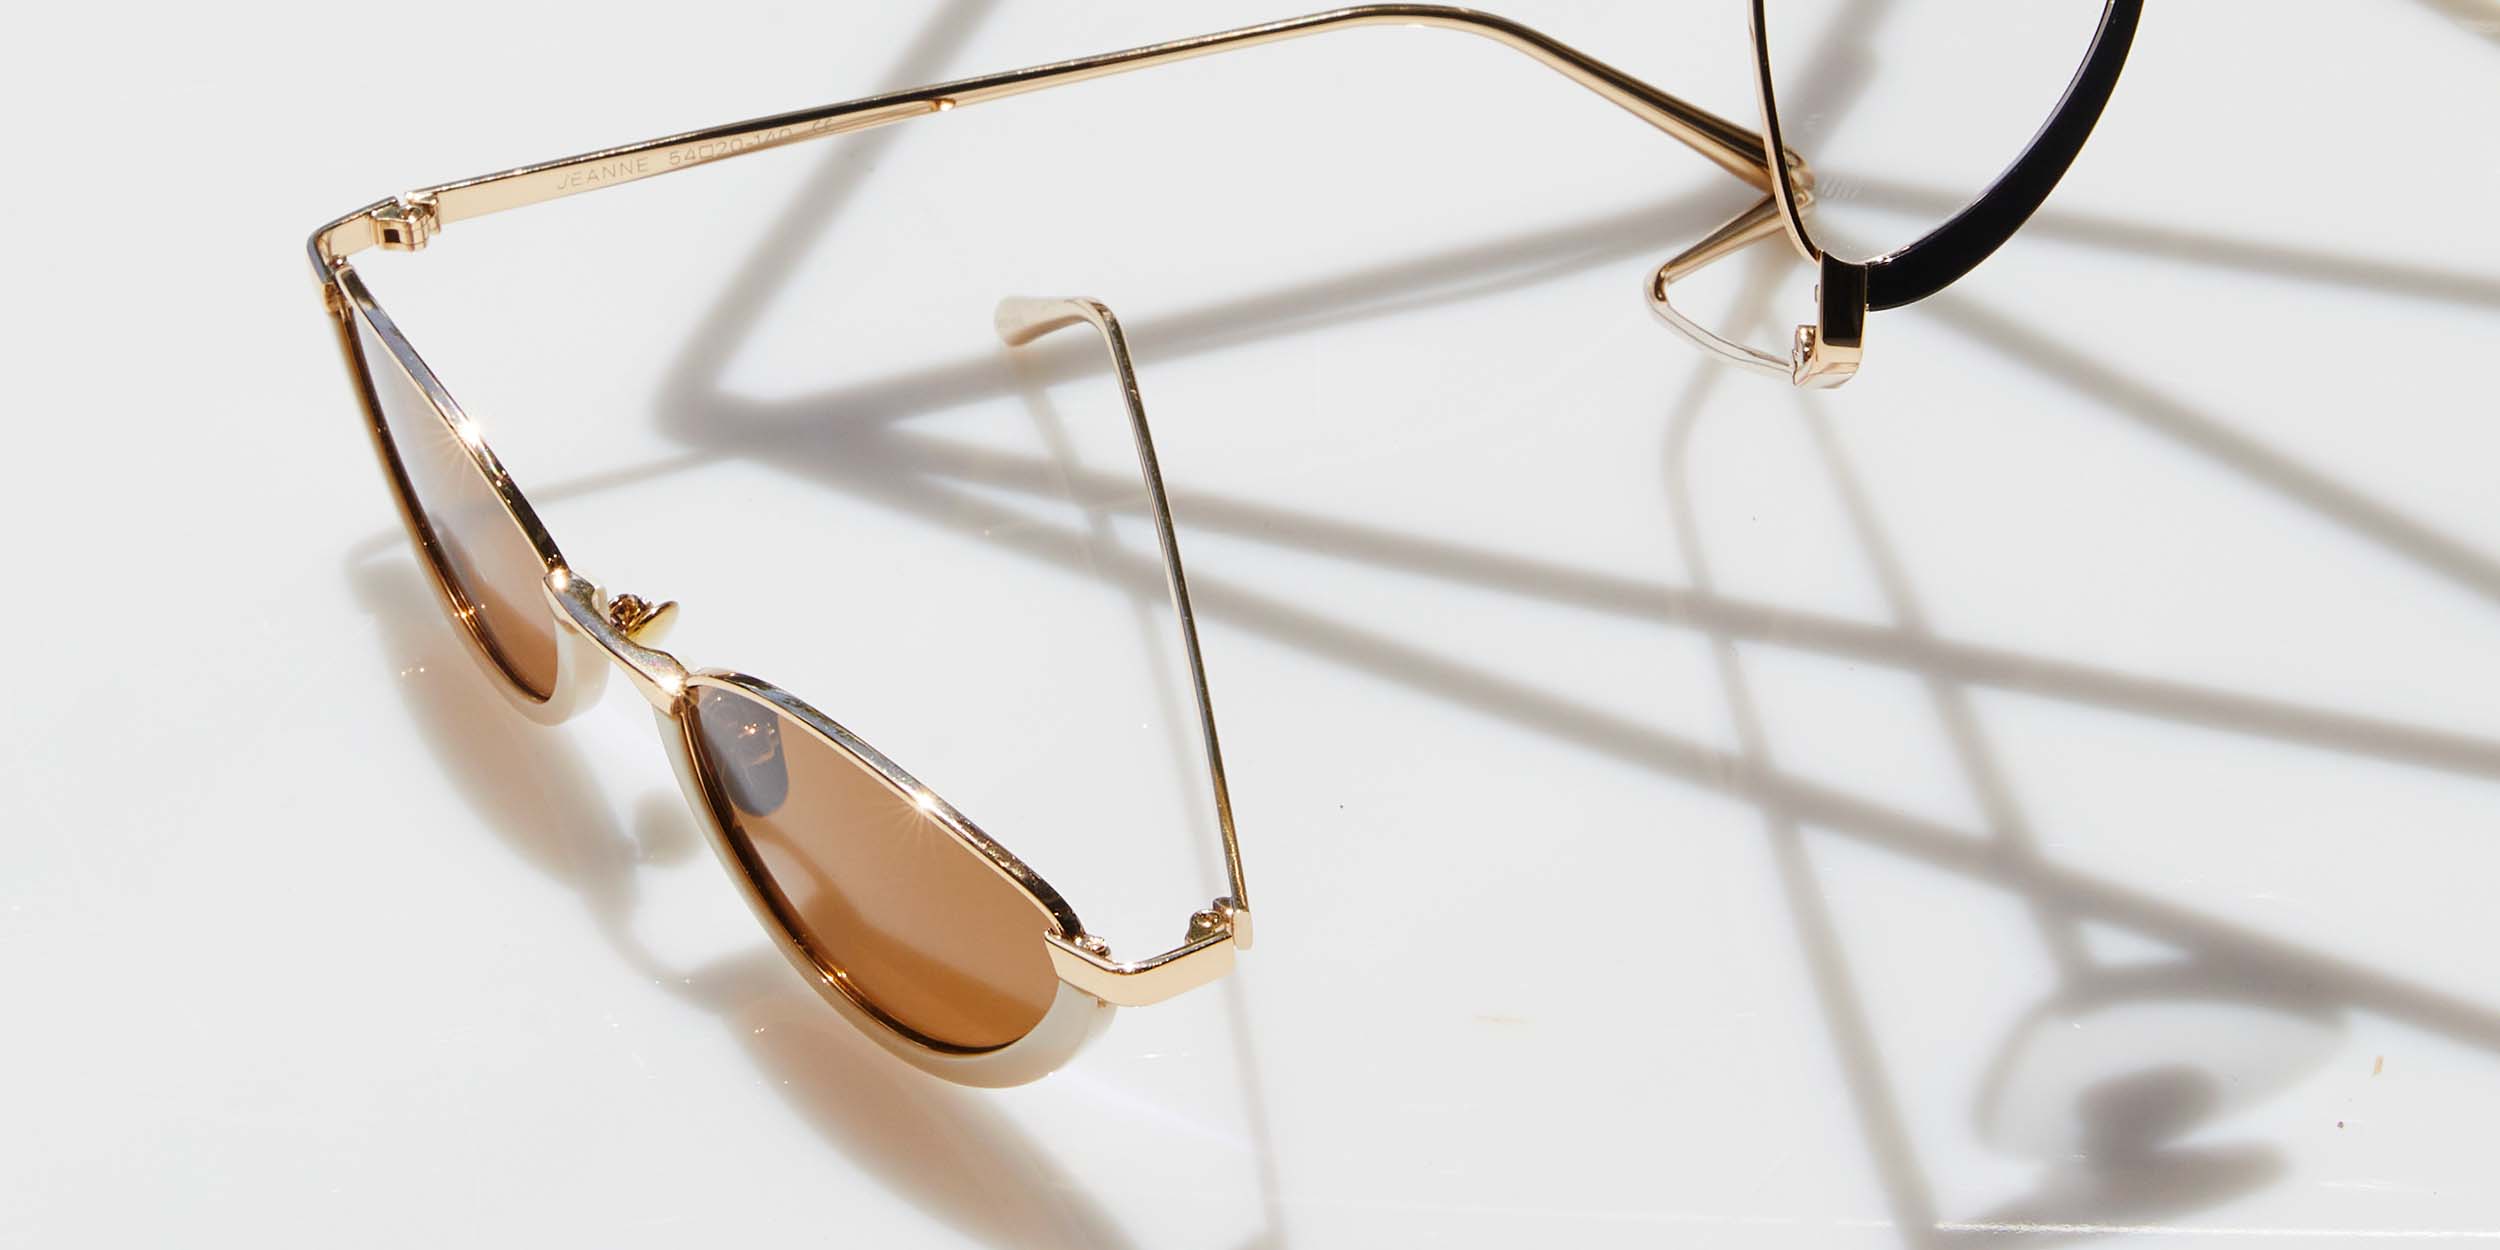 Photo Details of Jeanne Sun Tortoise & Gold Sun Glasses in a room